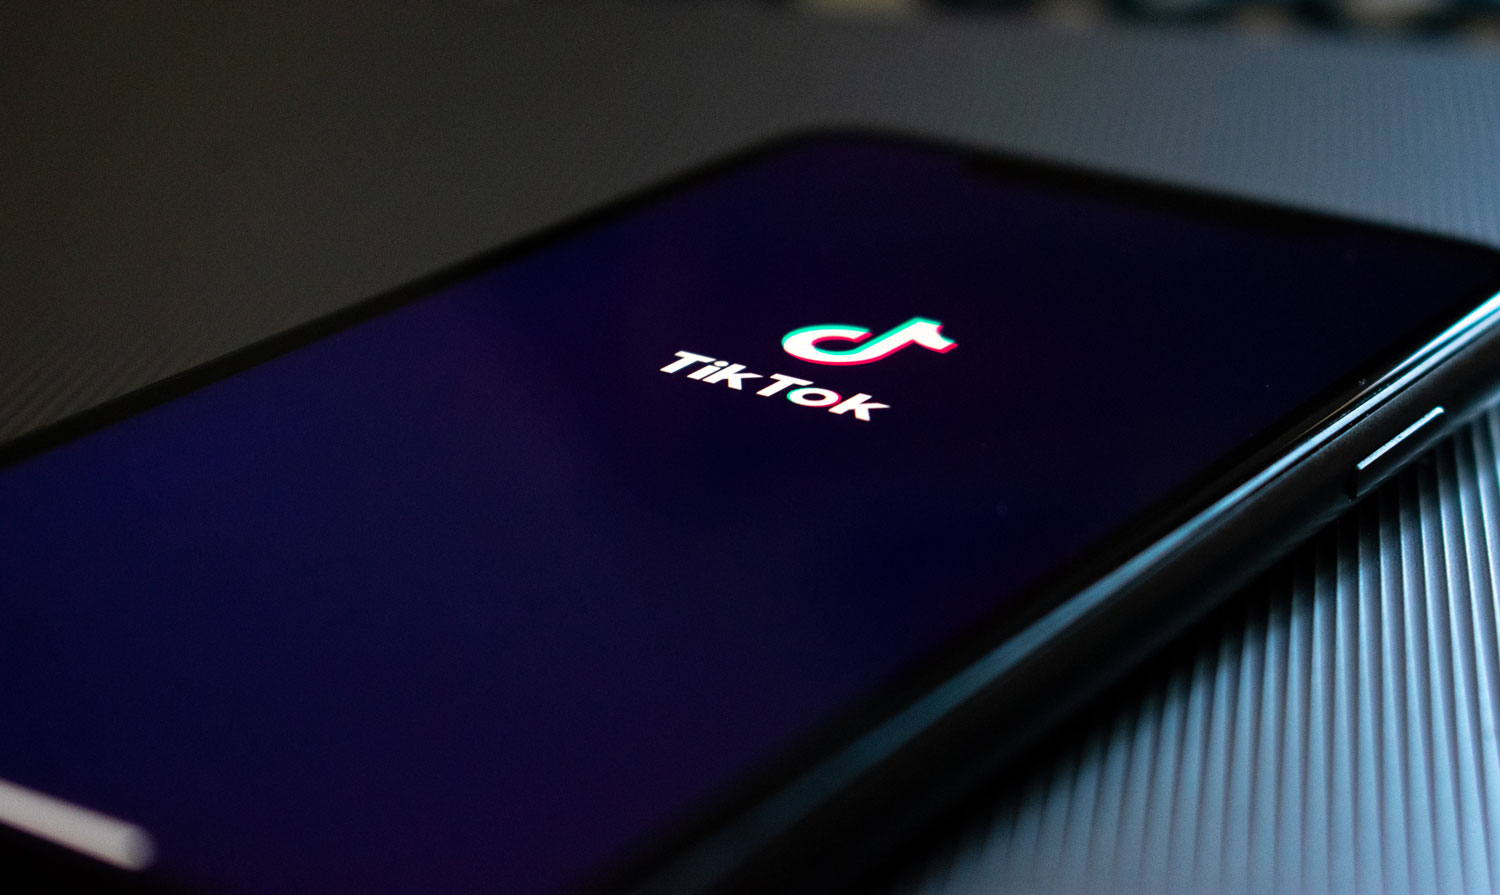 After spotted by iOS 14, TikTok will stop spying on user information